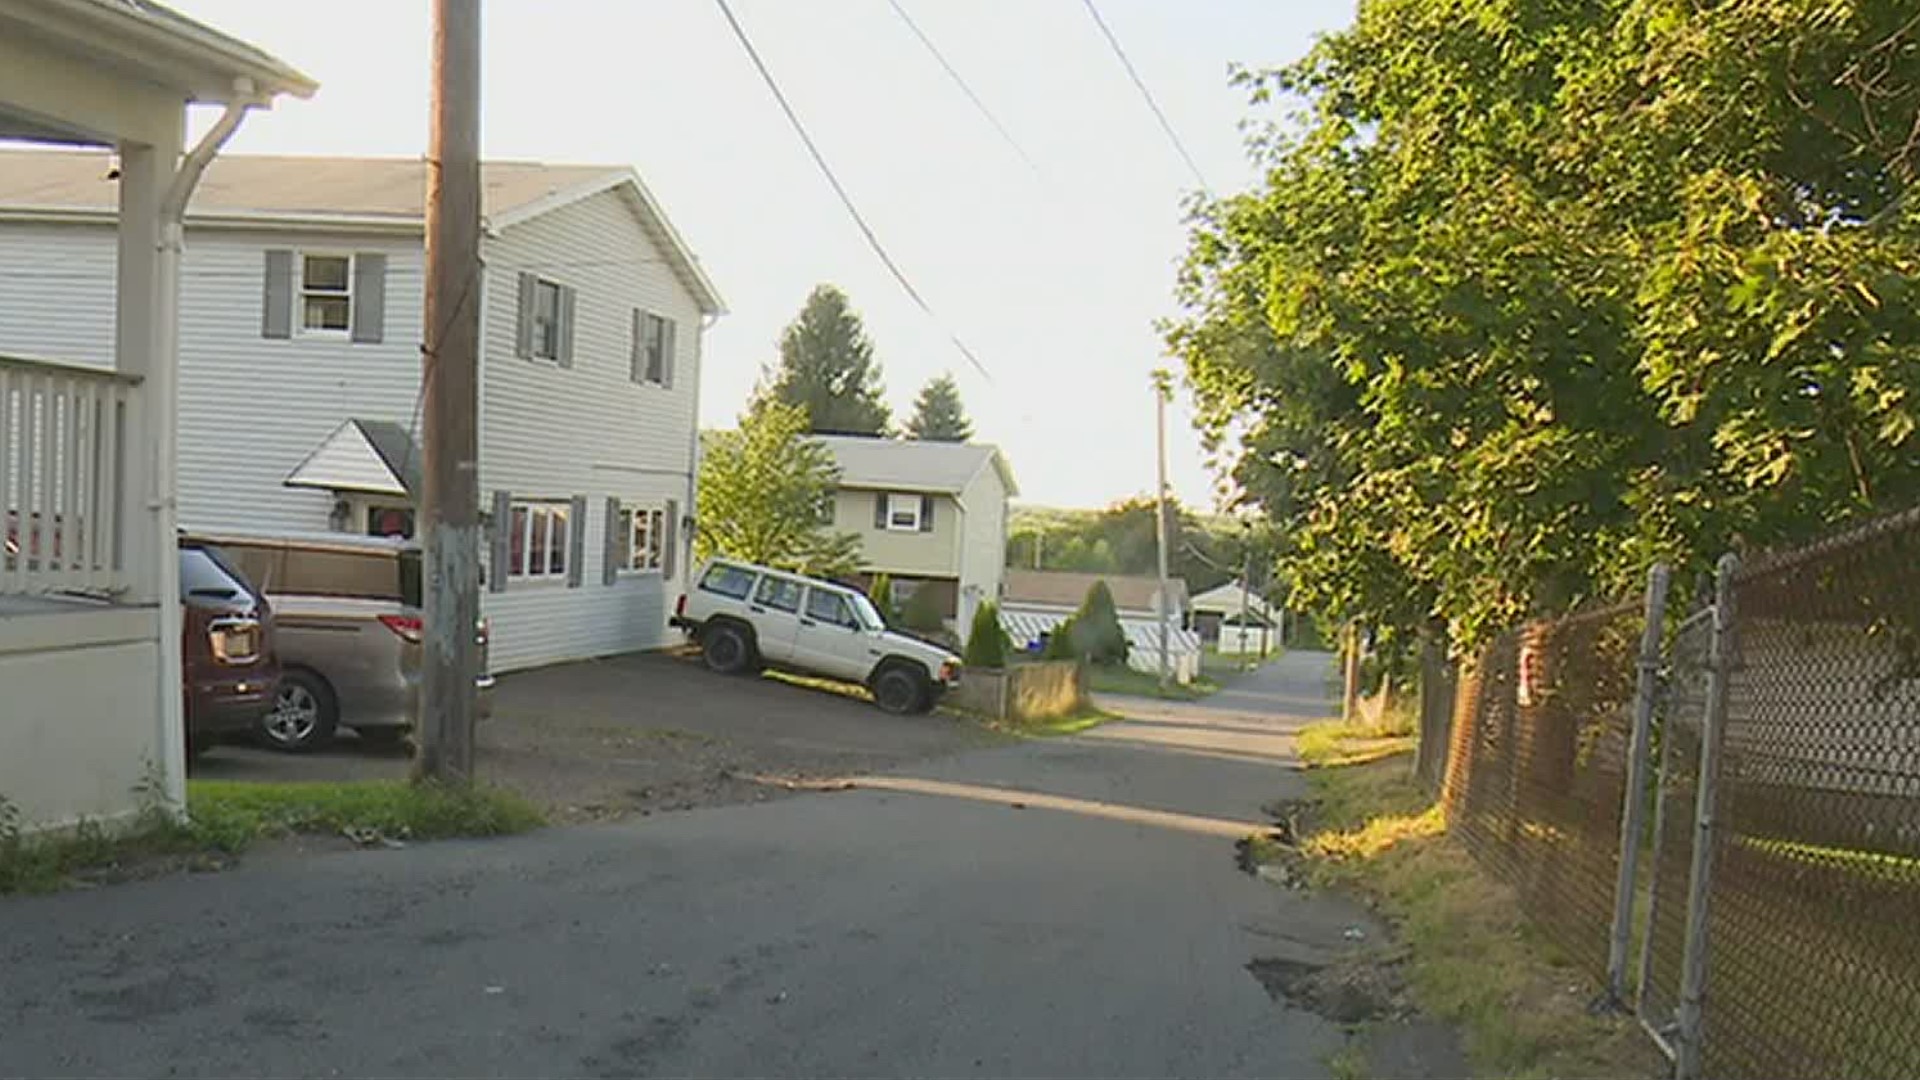 According to a neighbor, he heard the shots ring out around 3 p.m. Sunday afternoon along Perry Court in Hazleton.